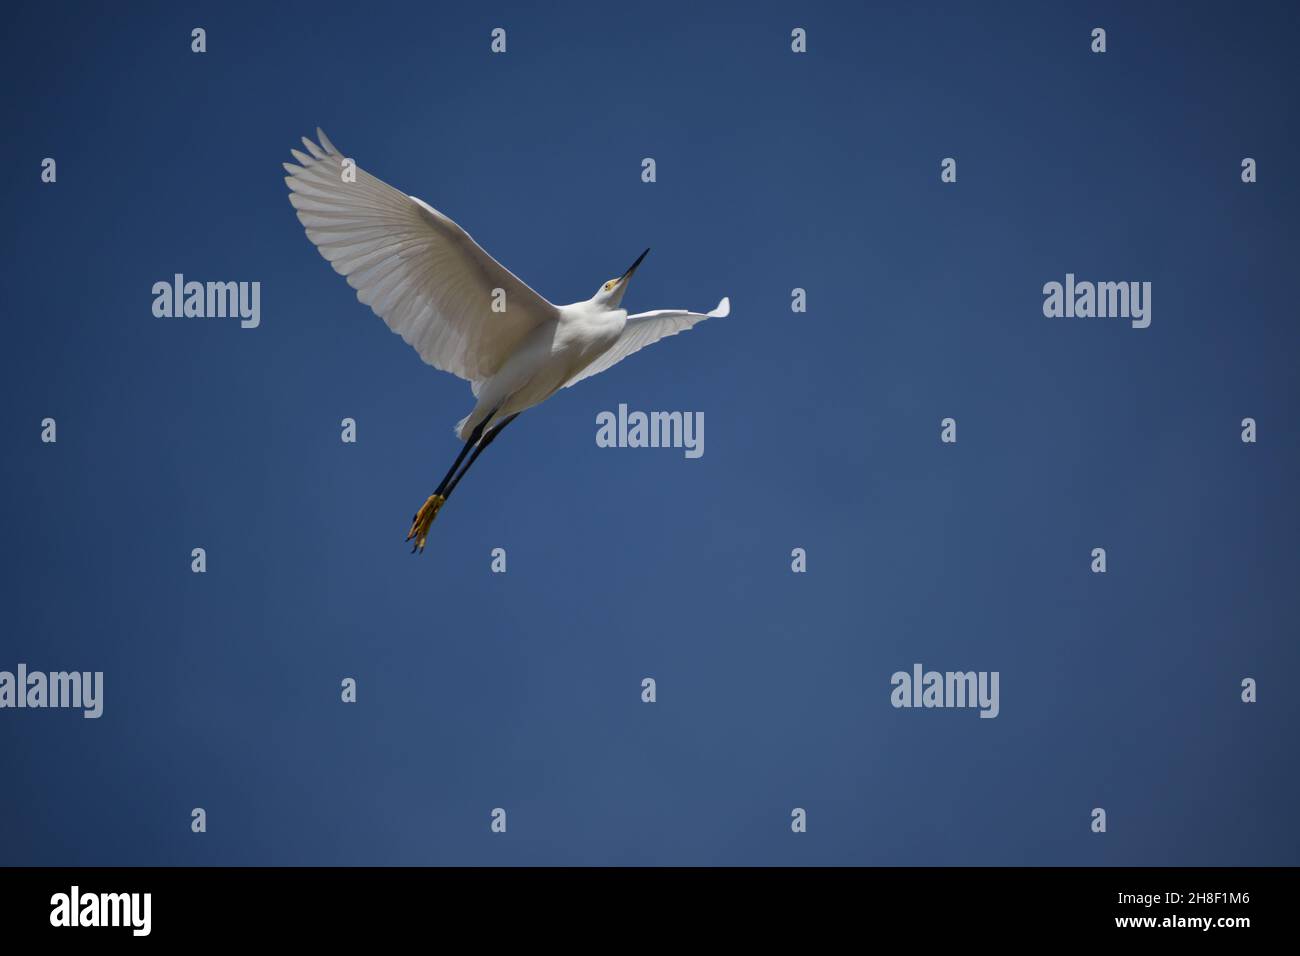 A Snowy Egret shows off its beauty flying upward against a deep blue sky. Stock Photo